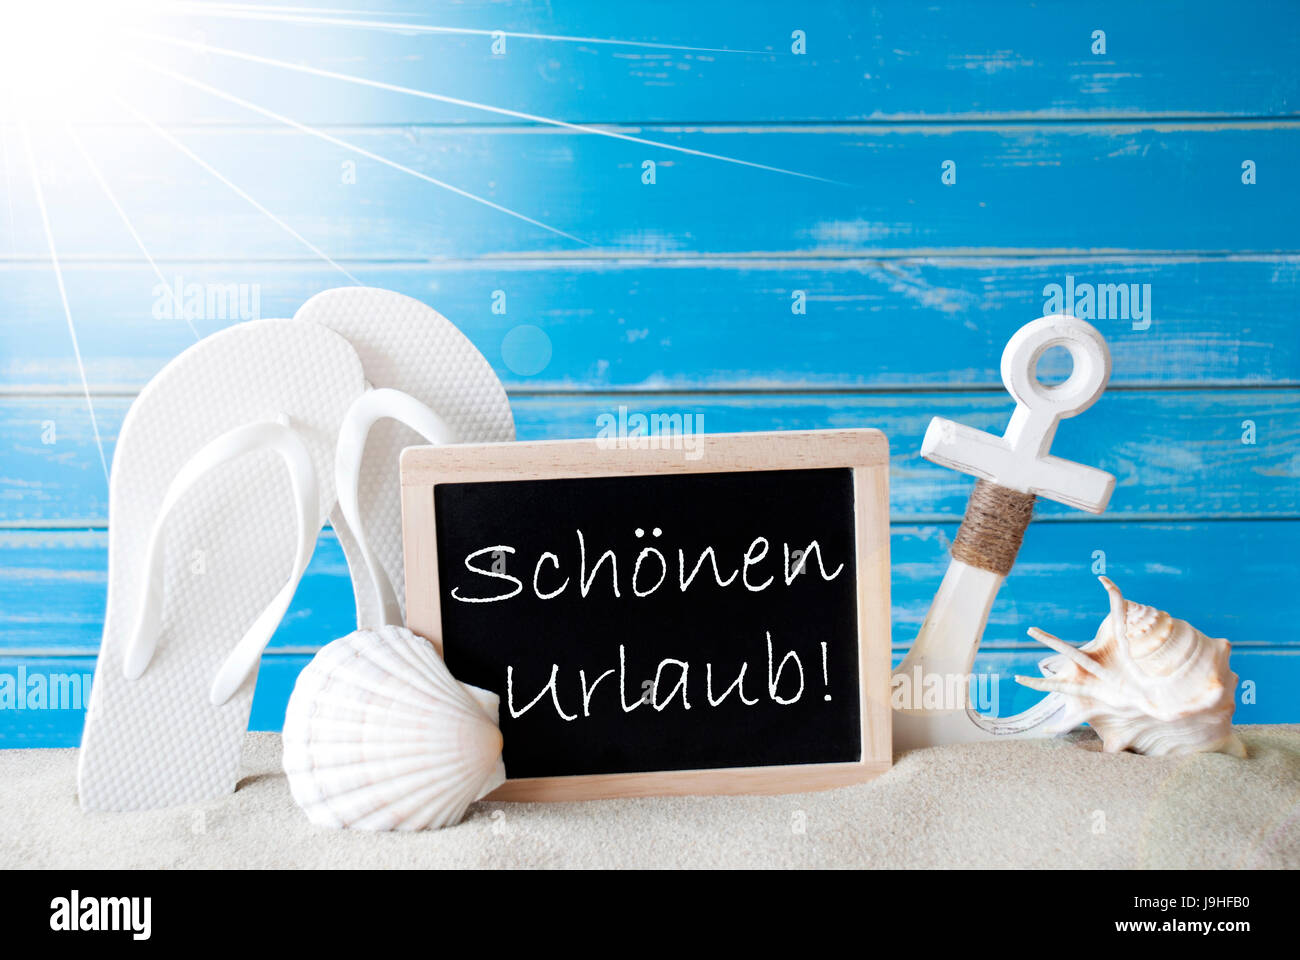 Sunny Summer Card With Schoenen Urlaub Means Happy Holidays Stock Photo